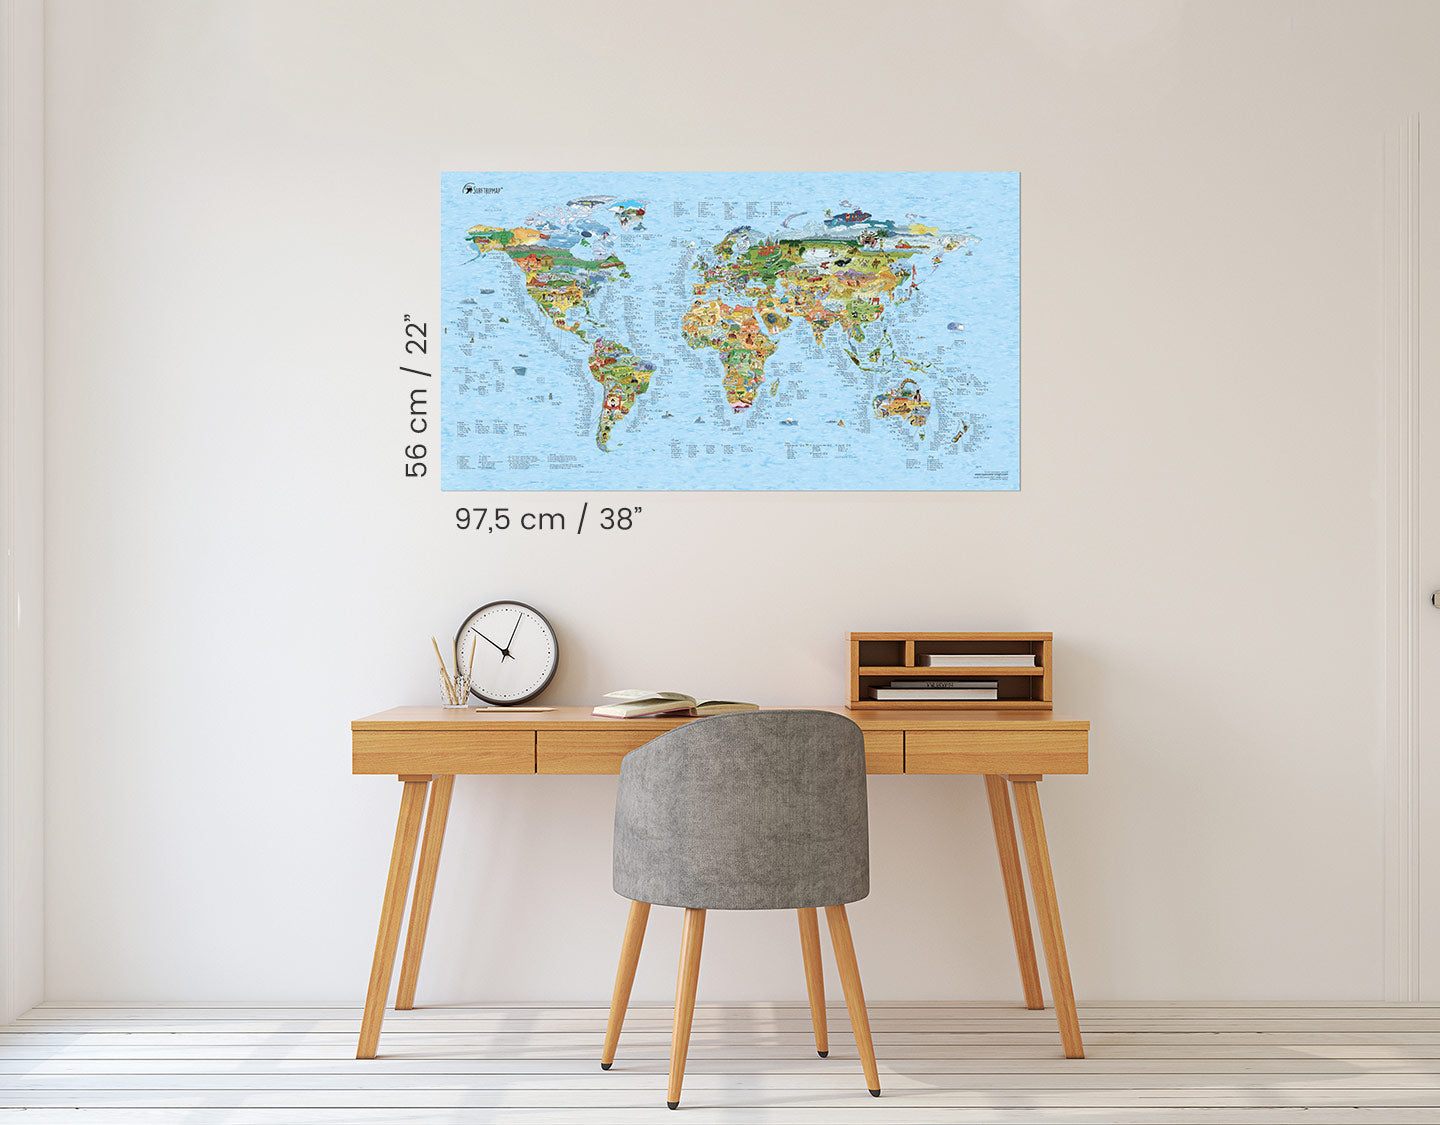 Awesome Maps - Surftrip Map Poster [97.5x56cm]